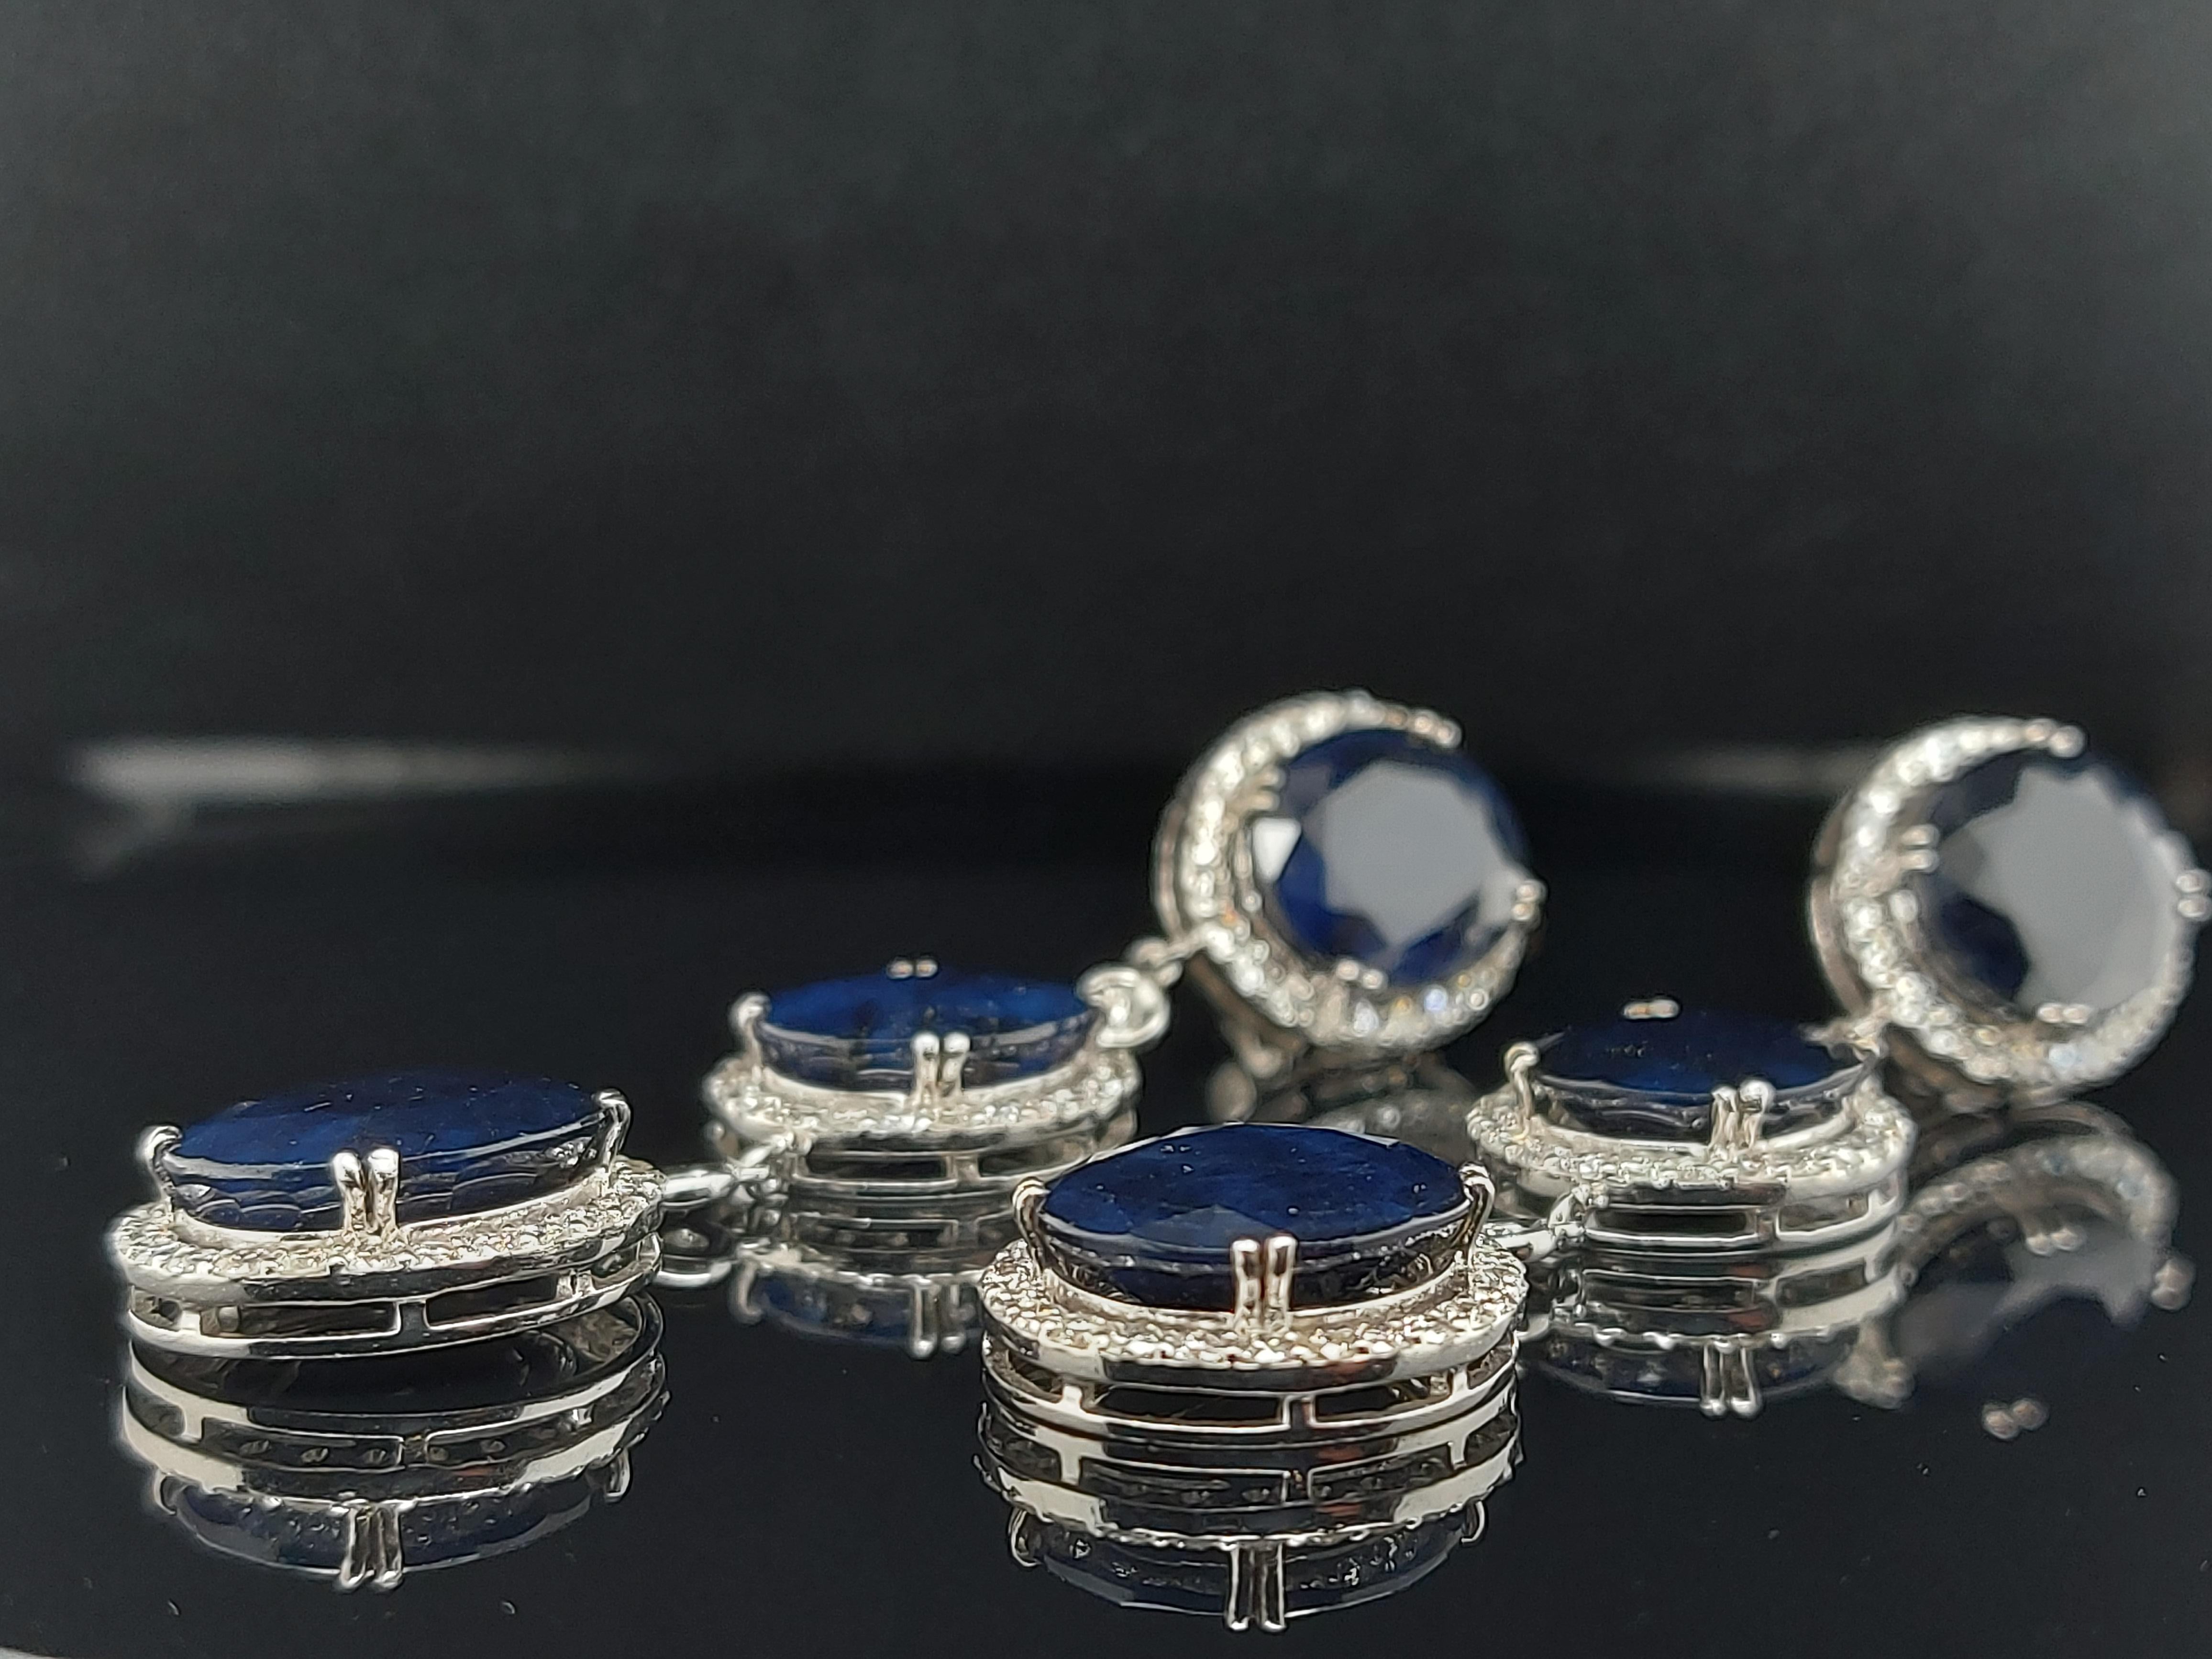 18kt White Gold Earrings 43.56ct Sapphire, 3.51ct Diamond For Sale 11